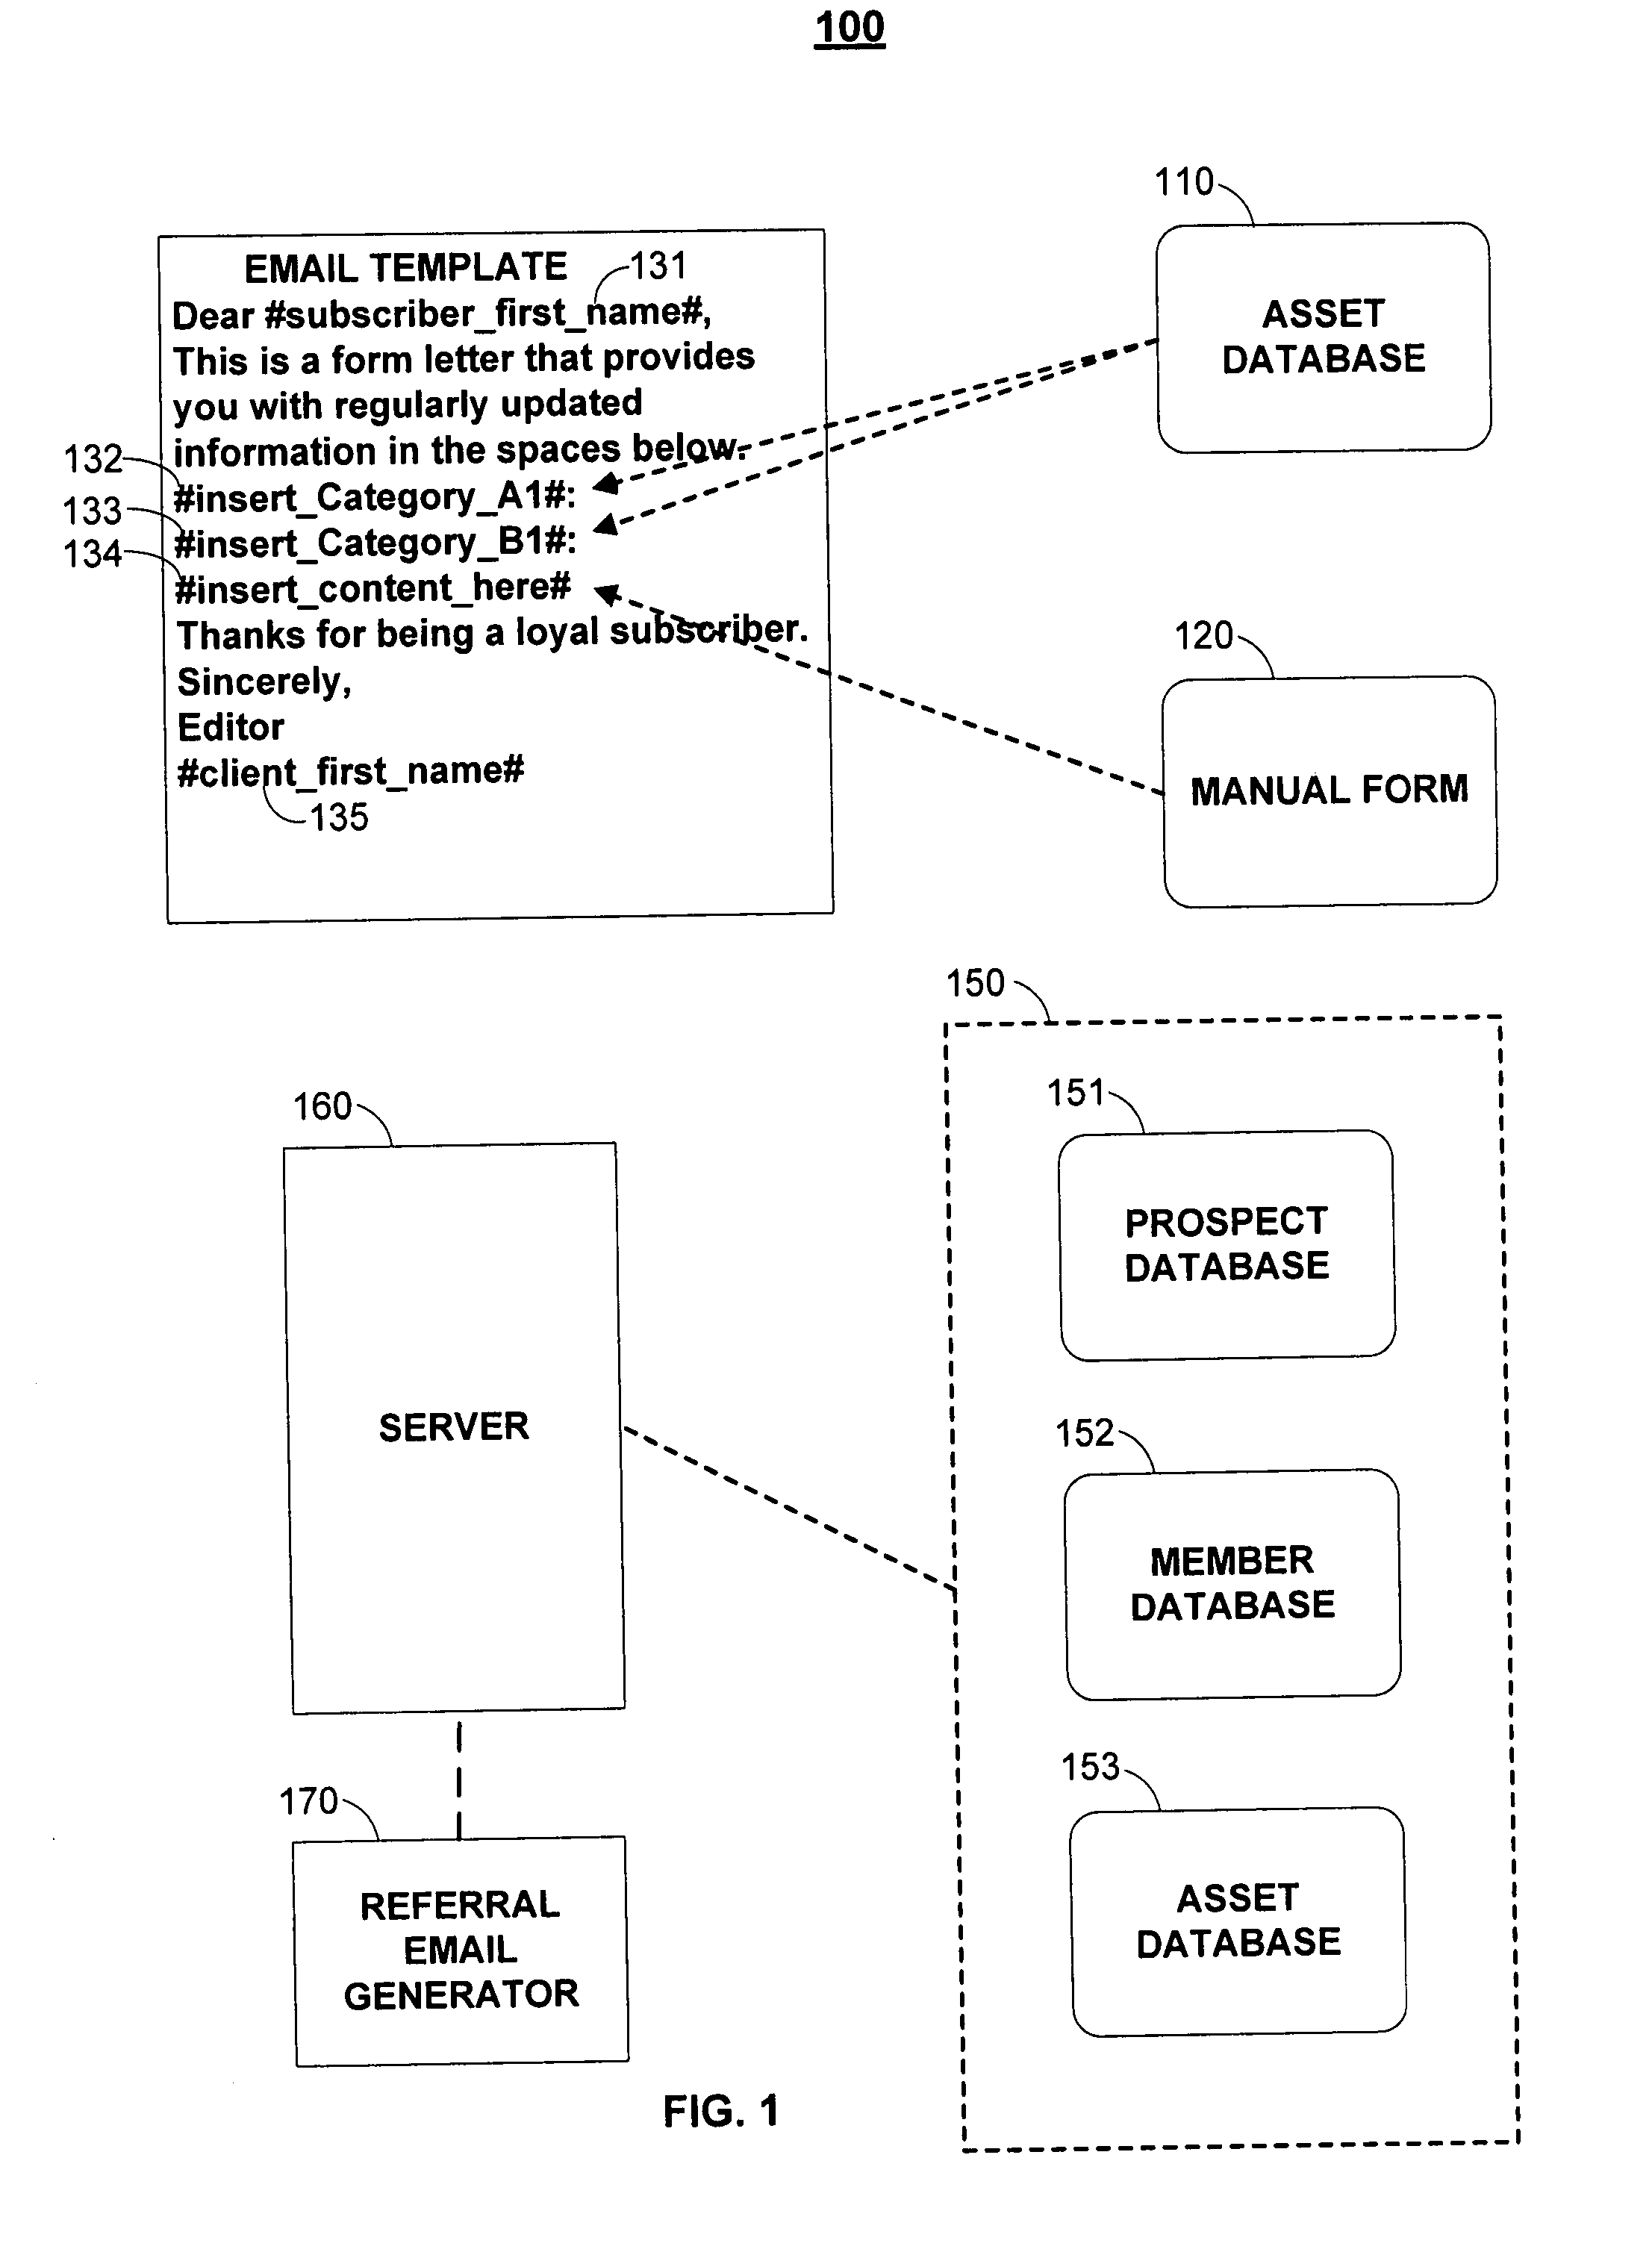 Systems and methods for a referral email generator and management system